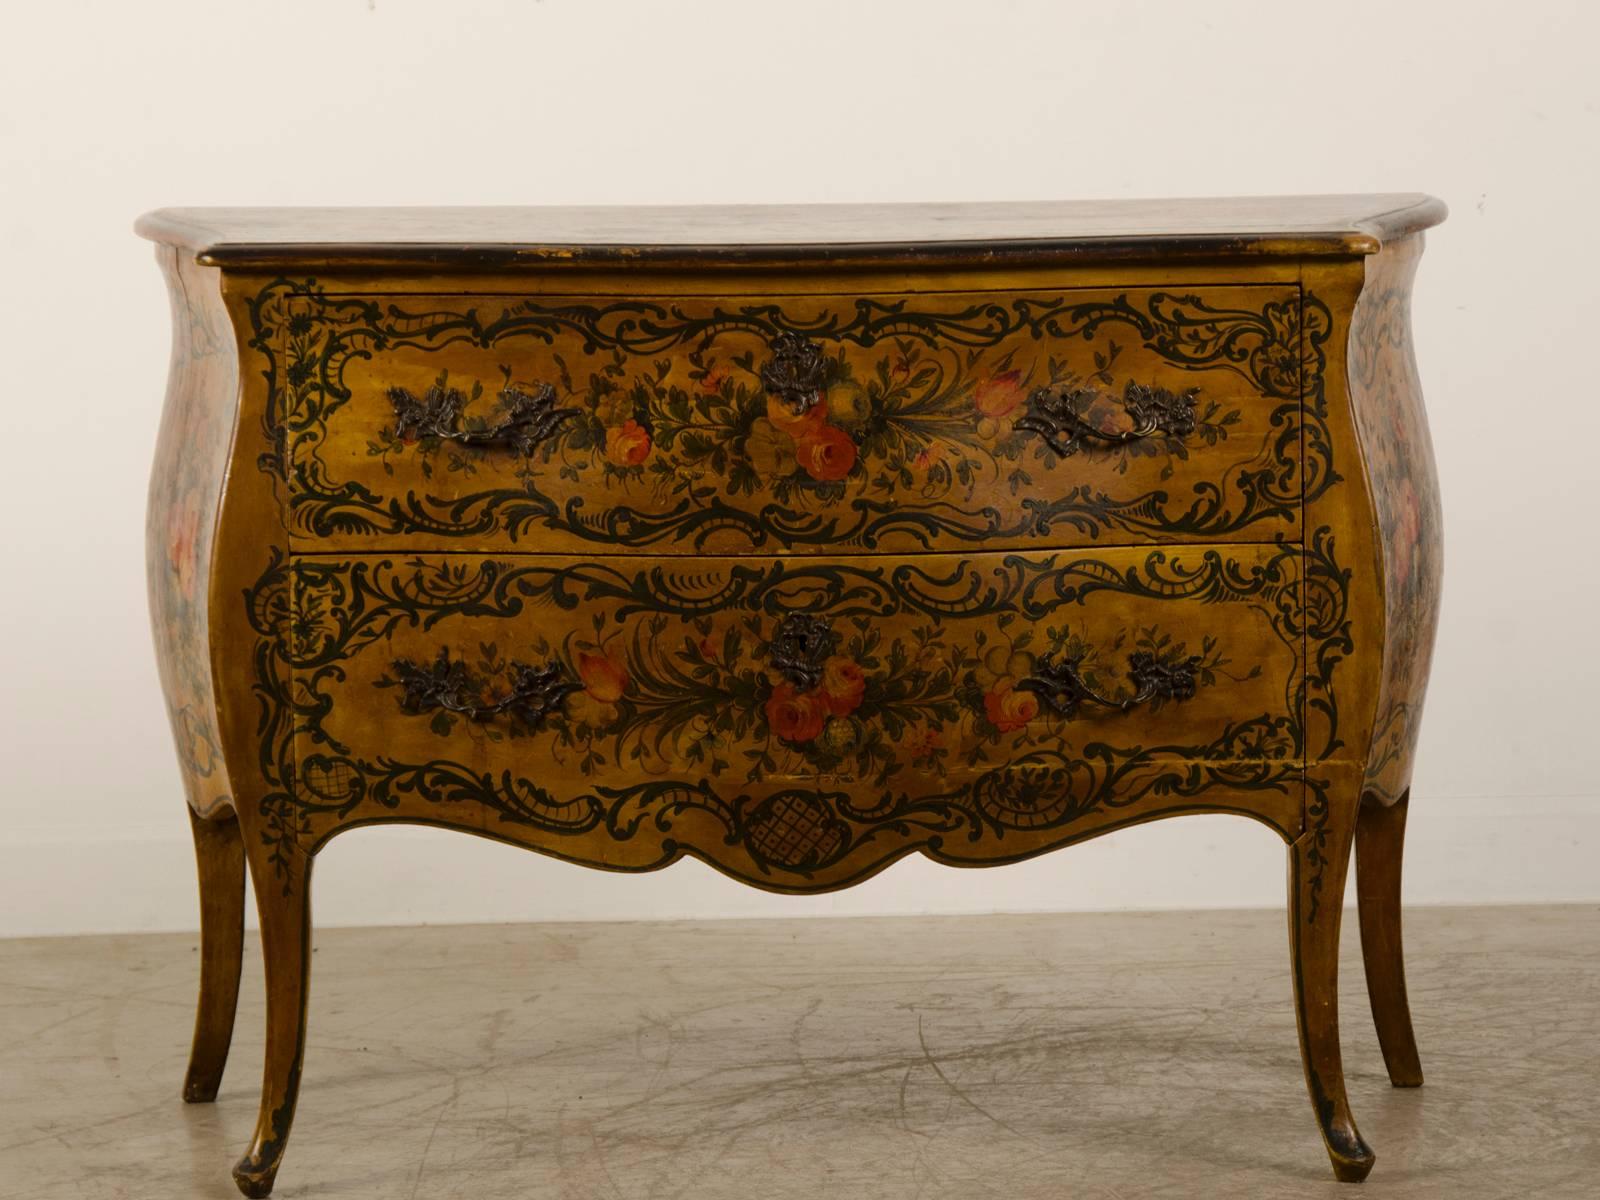 Receive our new selections direct from 1stdibs by email each week. Please click Follow Dealer below and see them first!

A lovely antique French Rococo style bombé chest of drawers, circa 1885 having the original painted floral decoration. Please